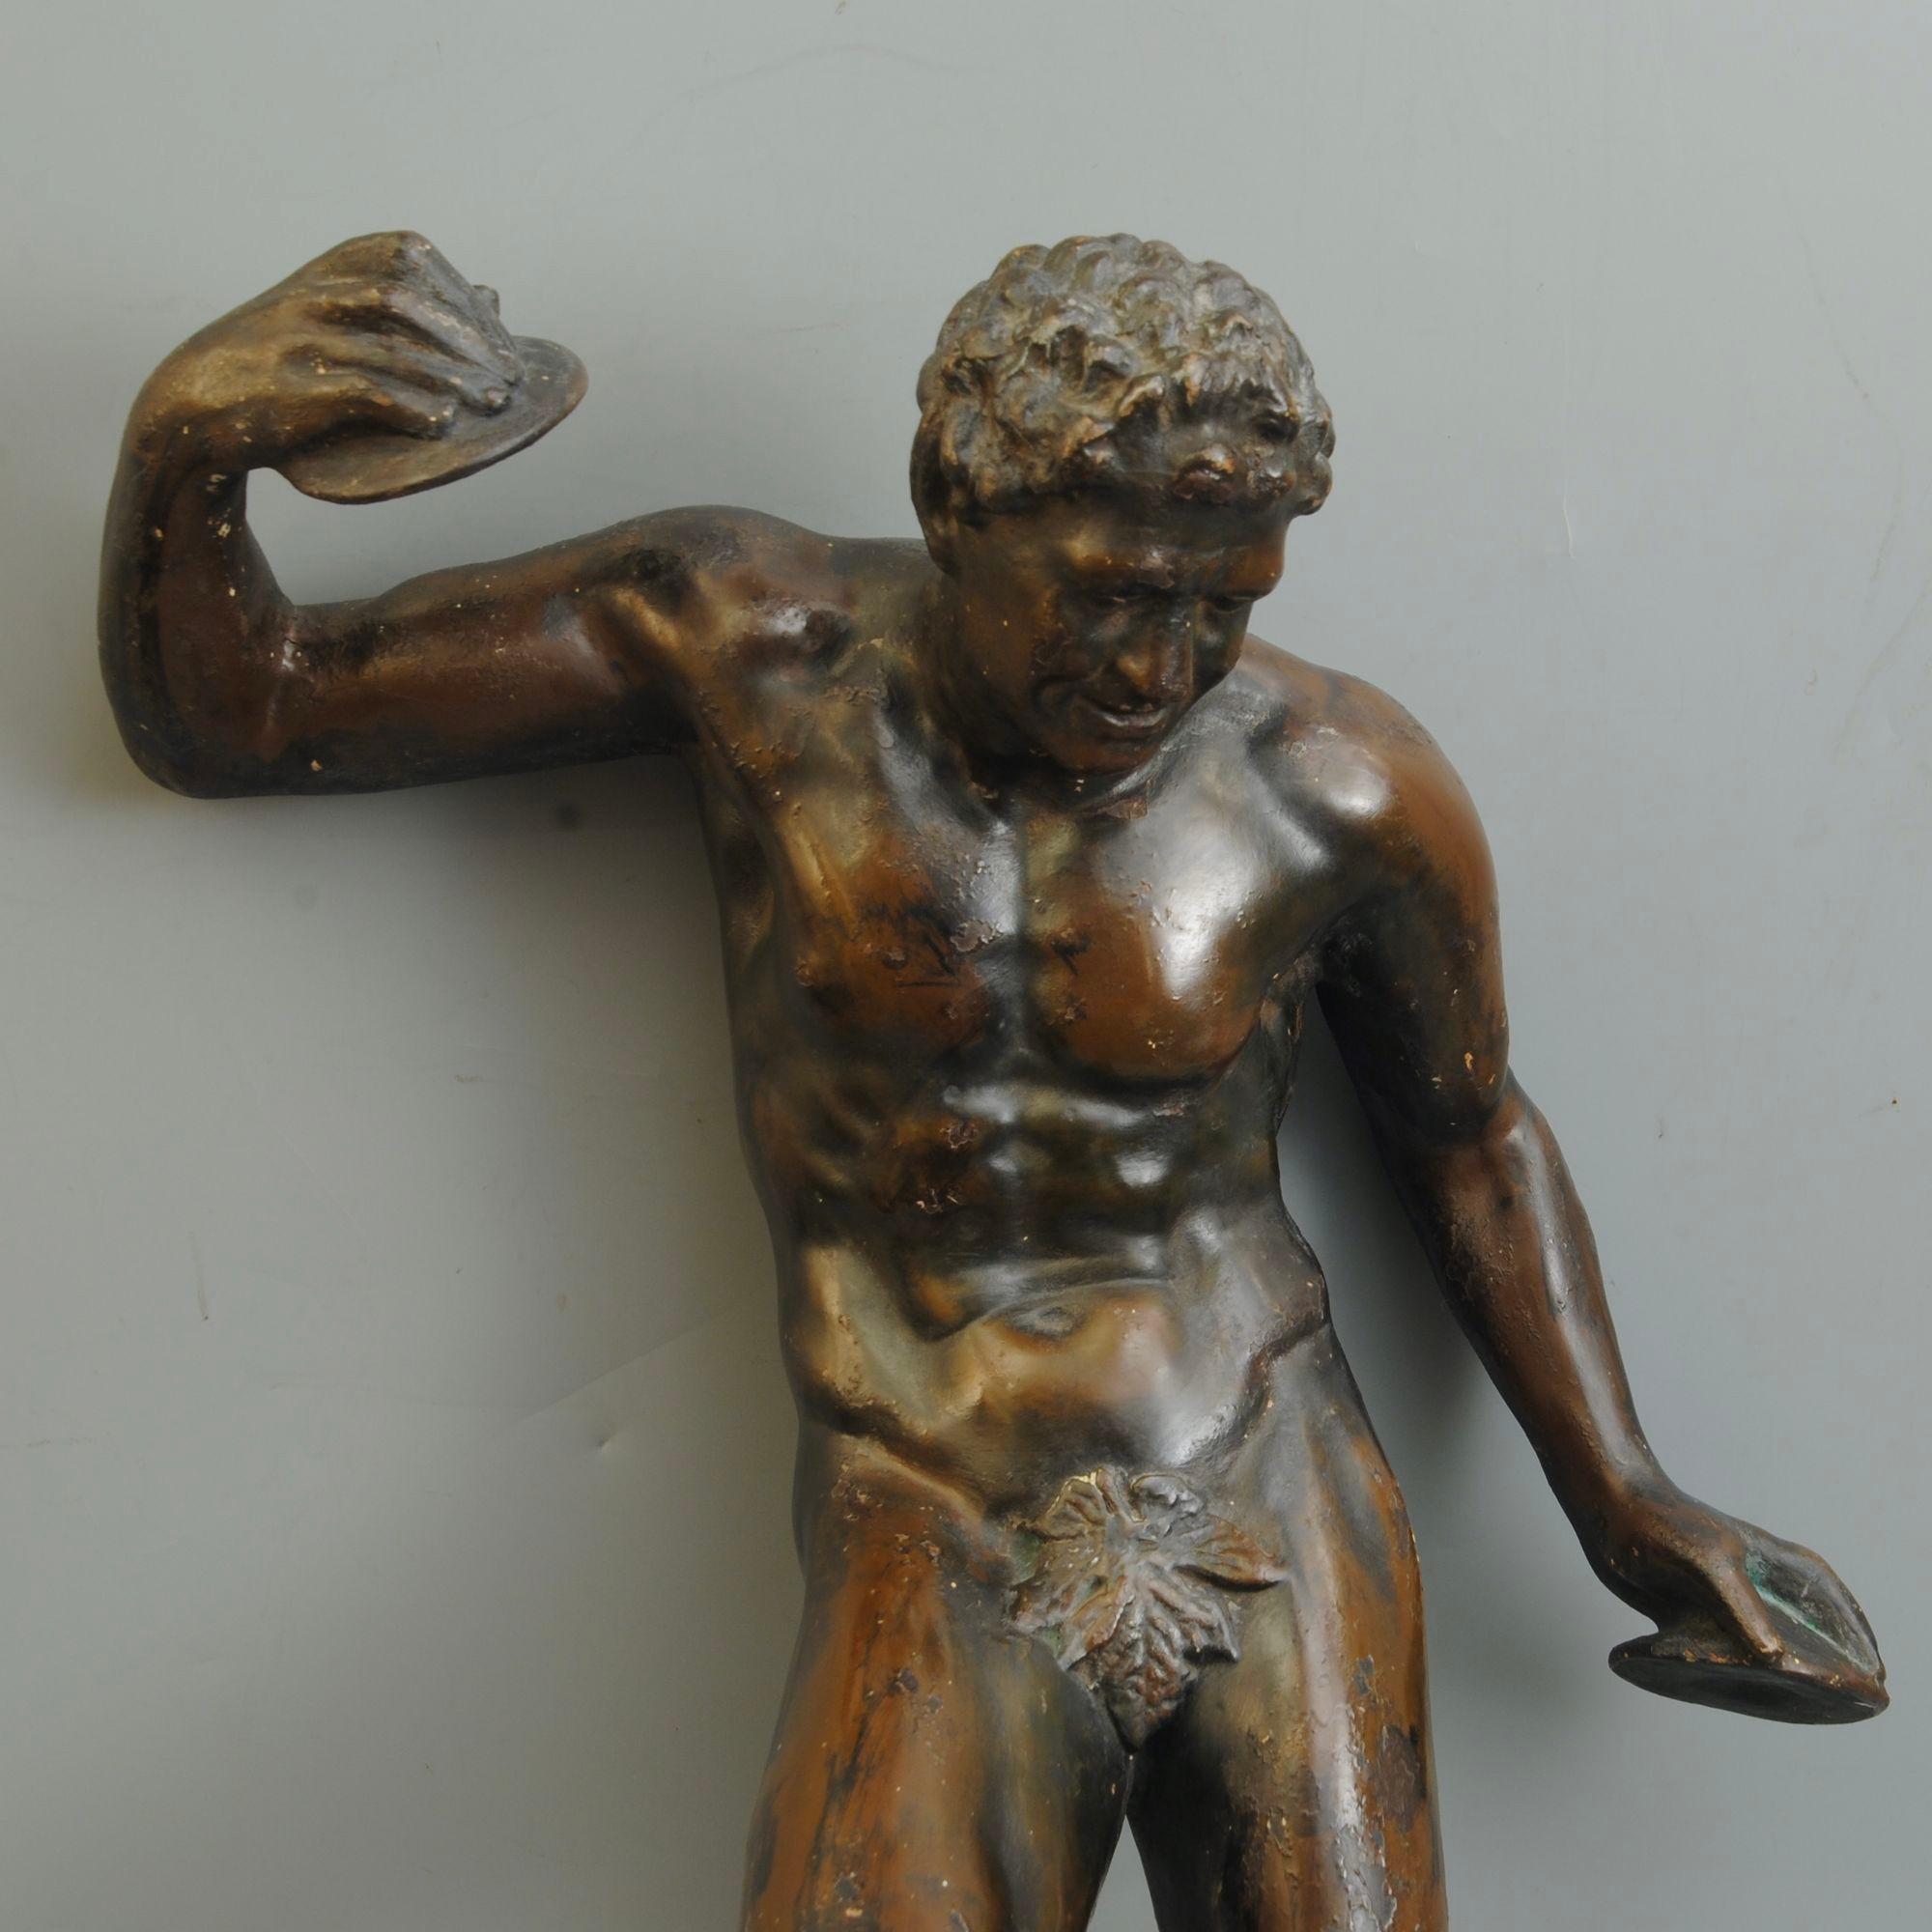 A 19th century Italian plaster figure of the dancing faun, patinated to look like bronze.
Circa 1870